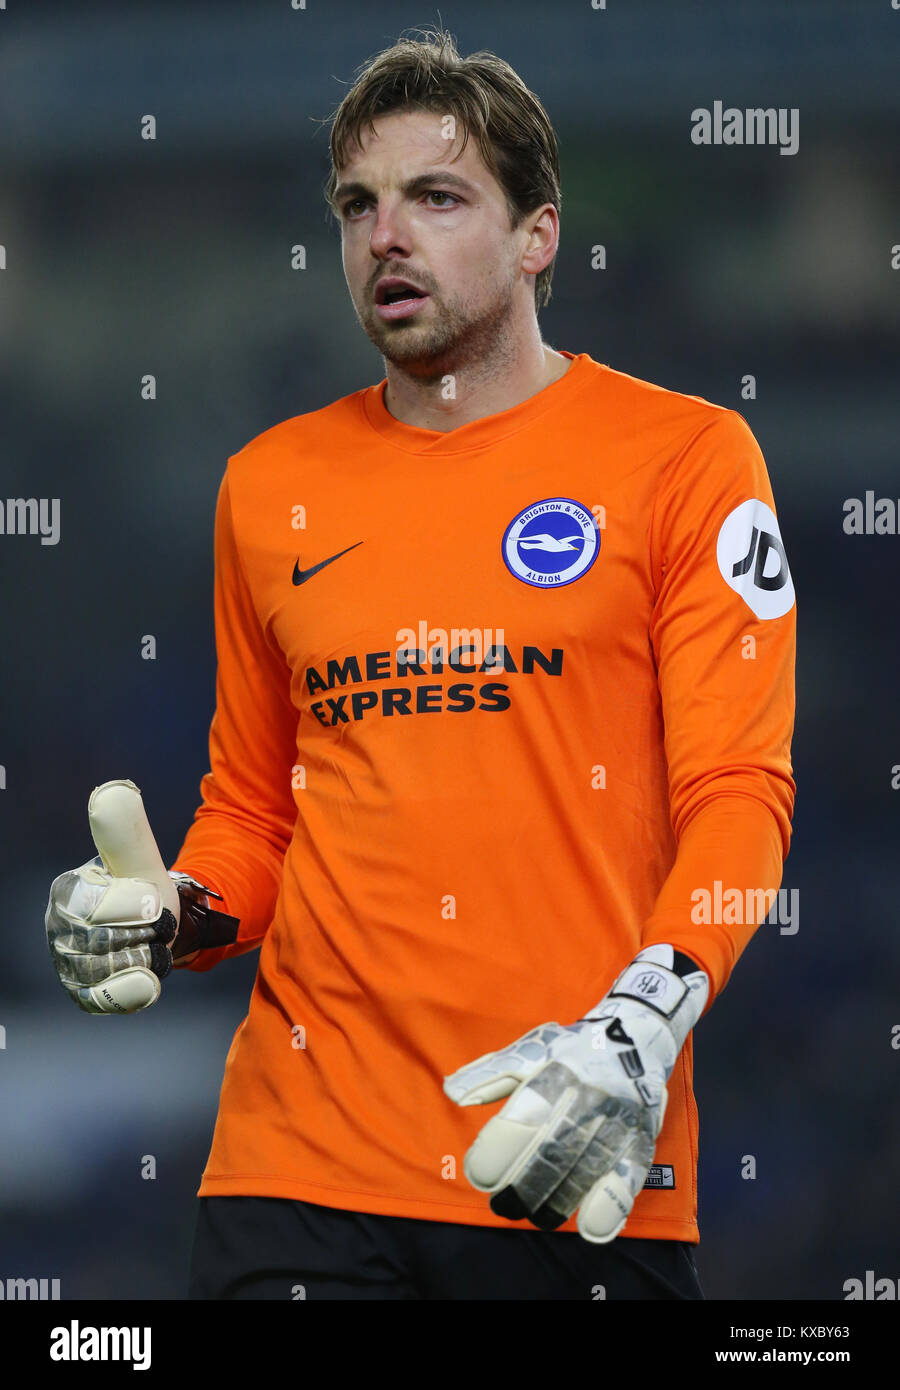 Brighton's Tim Krul during the Emirates FA Cup, Third Round match at the AMEX Stadium, Brighton. PRESS ASSOCIATION Photo. Picture date: Monday January 8, 2018. See PA story SOCCER Brighton. Photo credit should read: Gareth Fuller/PA Wire. RESTRICTIONS: No use with unauthorised audio, video, data, fixture lists, club/league logos or 'live' services. Online in-match use limited to 75 images, no video emulation. No use in betting, games or single club/league/player publications. Stock Photo